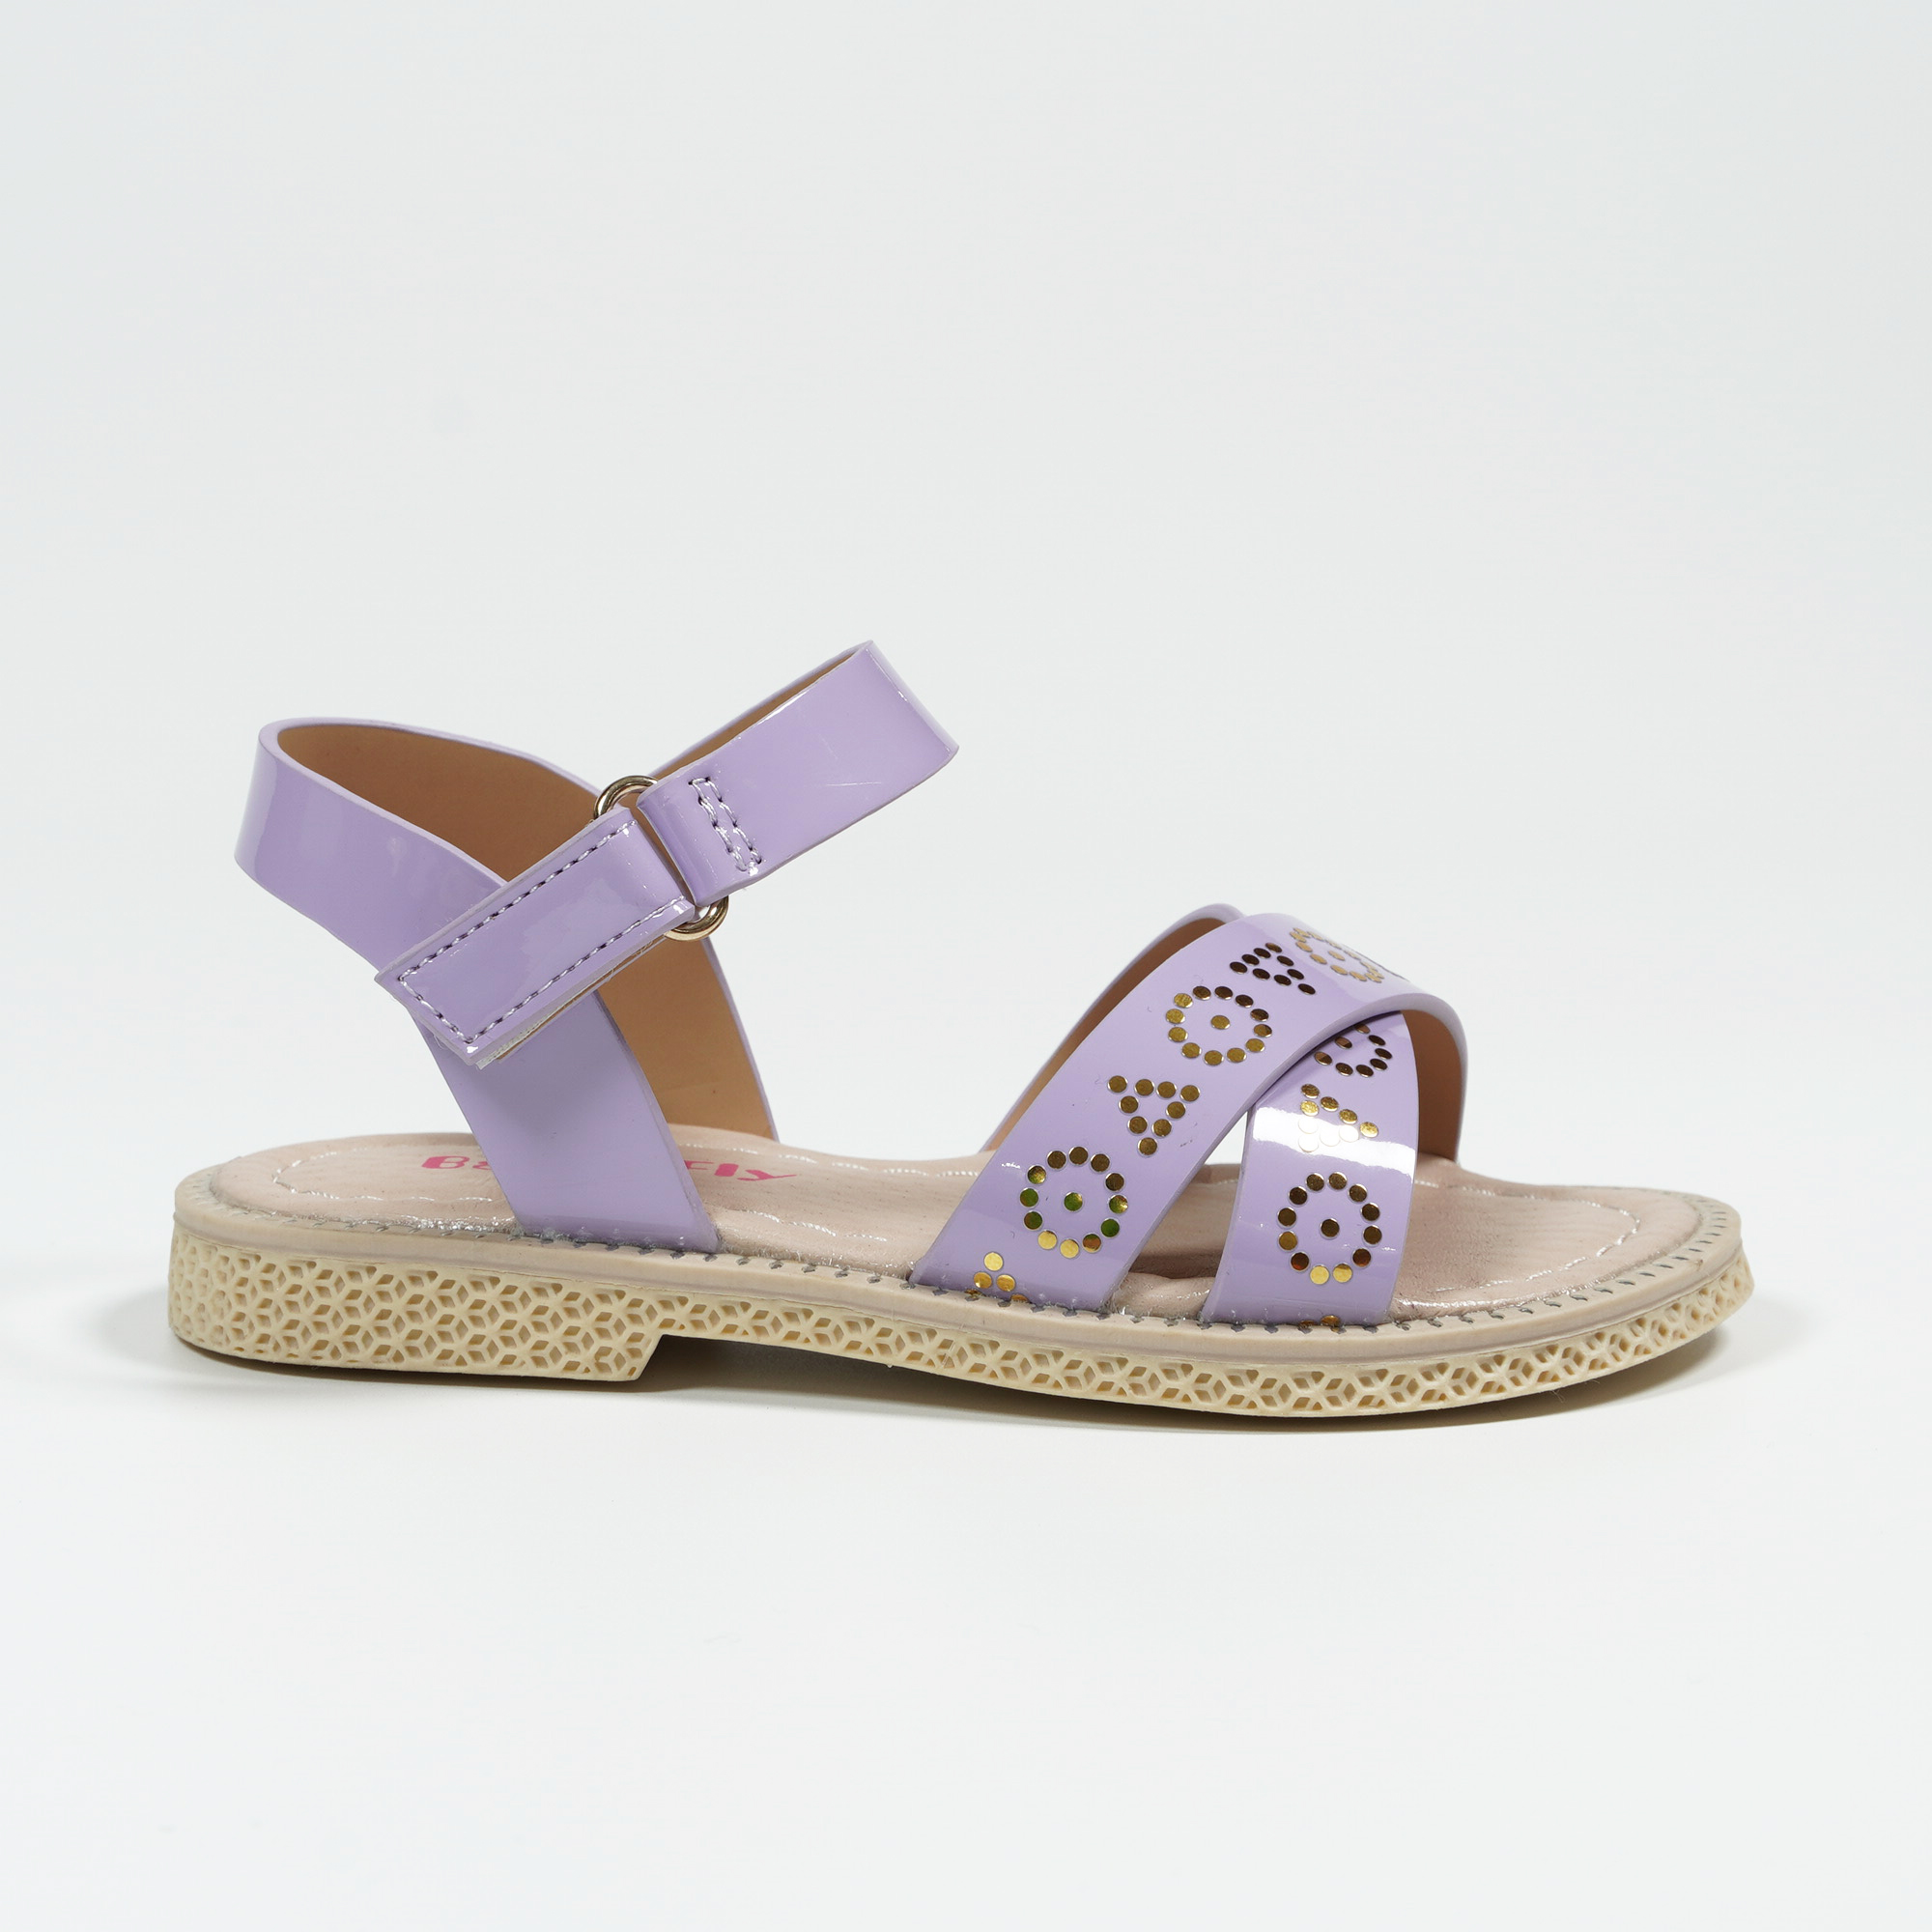 Trendy and Comfortable Casual Sandal Options for the Summer